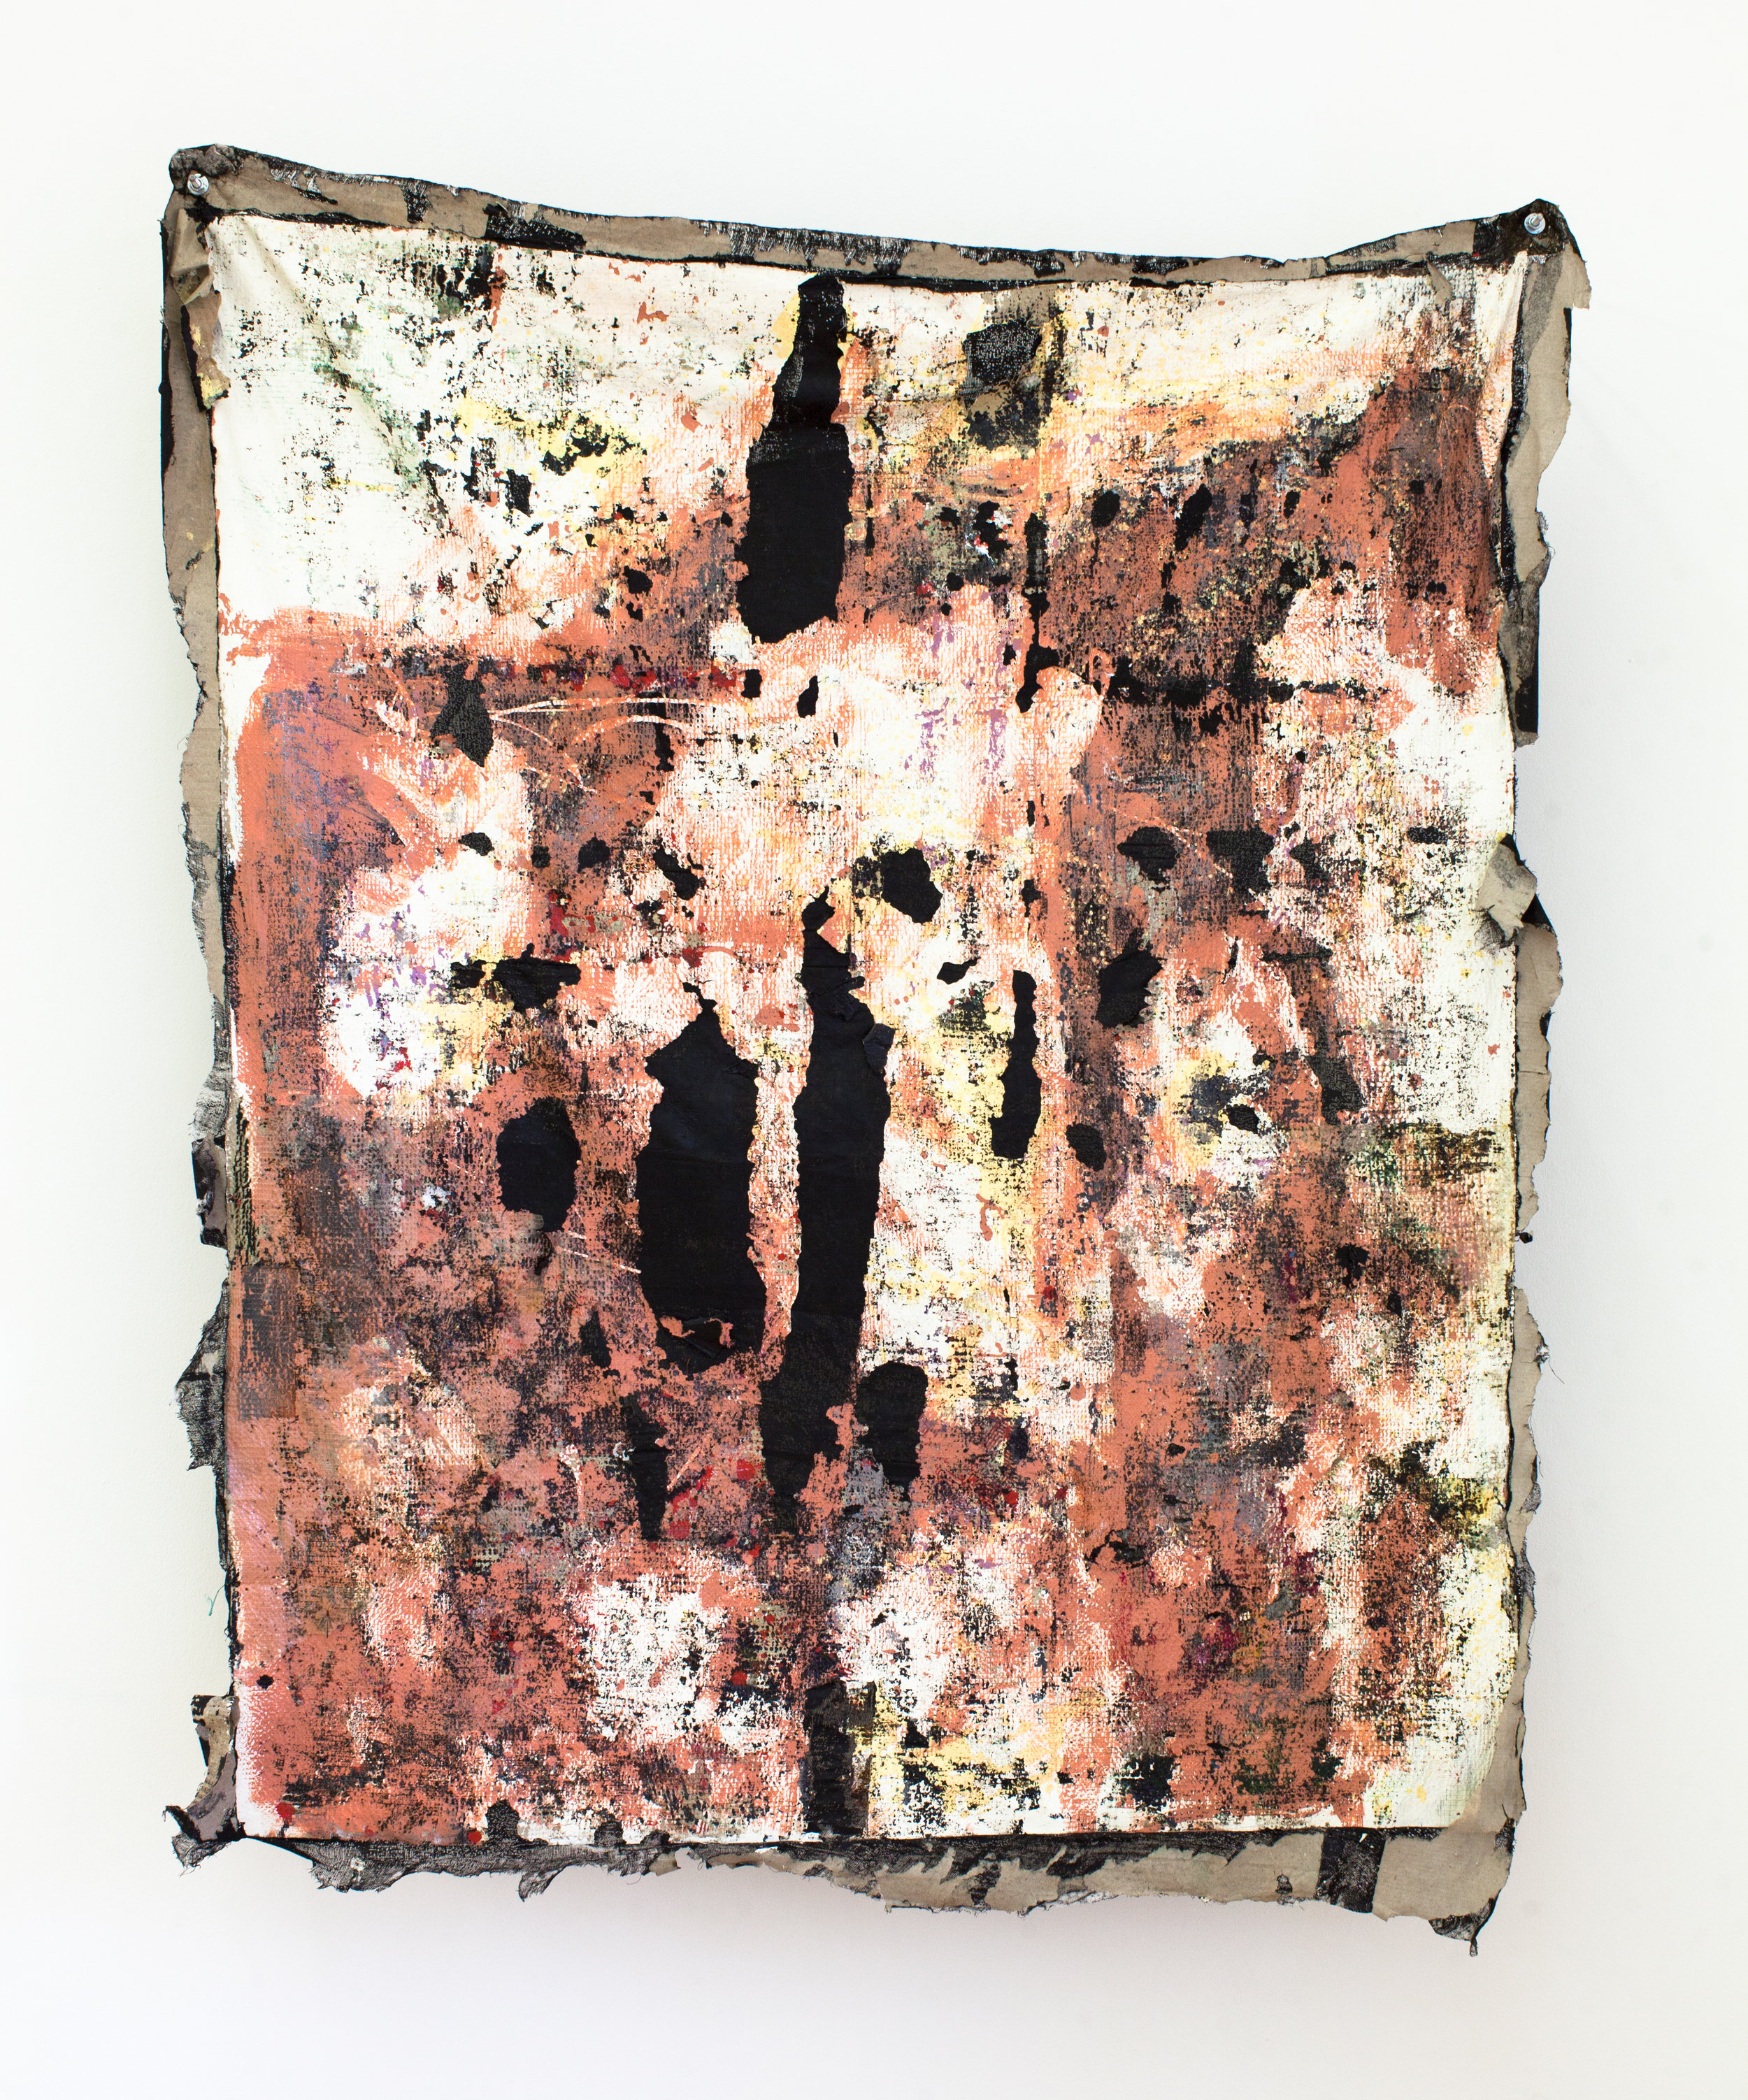   Everything Goes   mistinted house paints, bitumen rubber, pastel, plastic, detritus, cardboard on muslin, steel supports  129 x 105 x 23 cm  Photograph James Field, courtesy Adelaide Central School of Art 